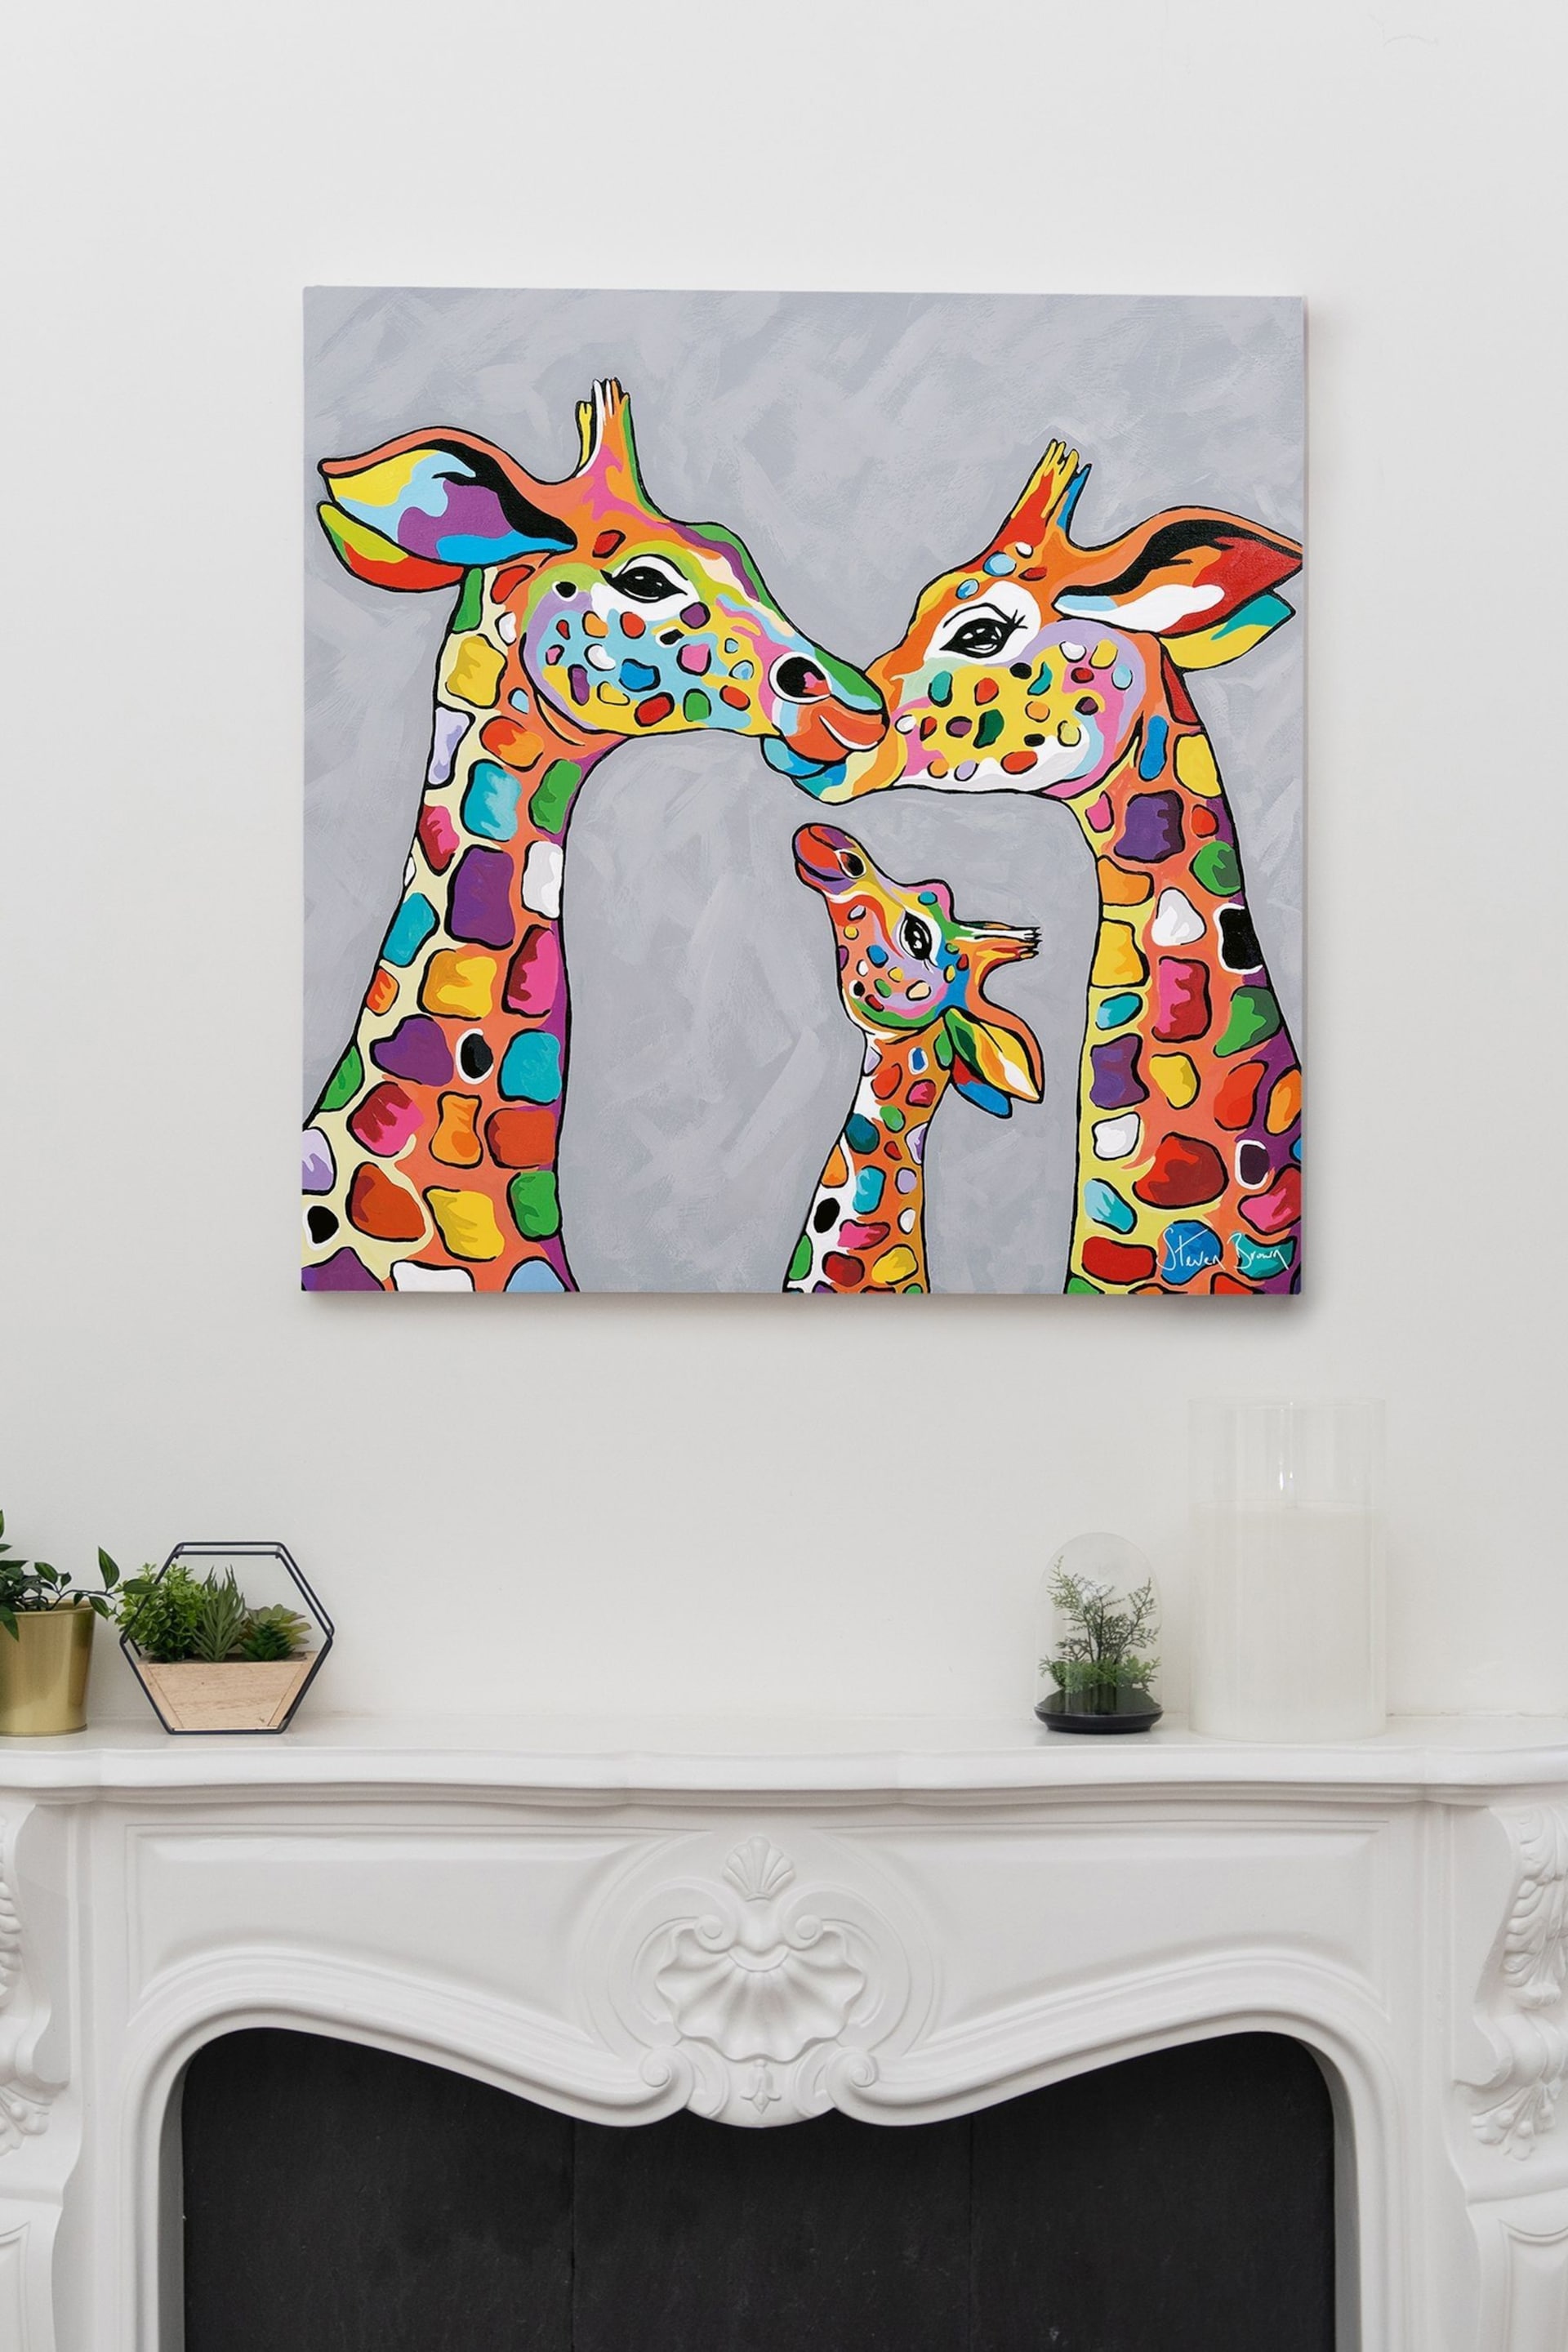 Steven Brown Art Grey Andy and Amy McZoo and The Wean Medium Canvas Print - Image 1 of 4